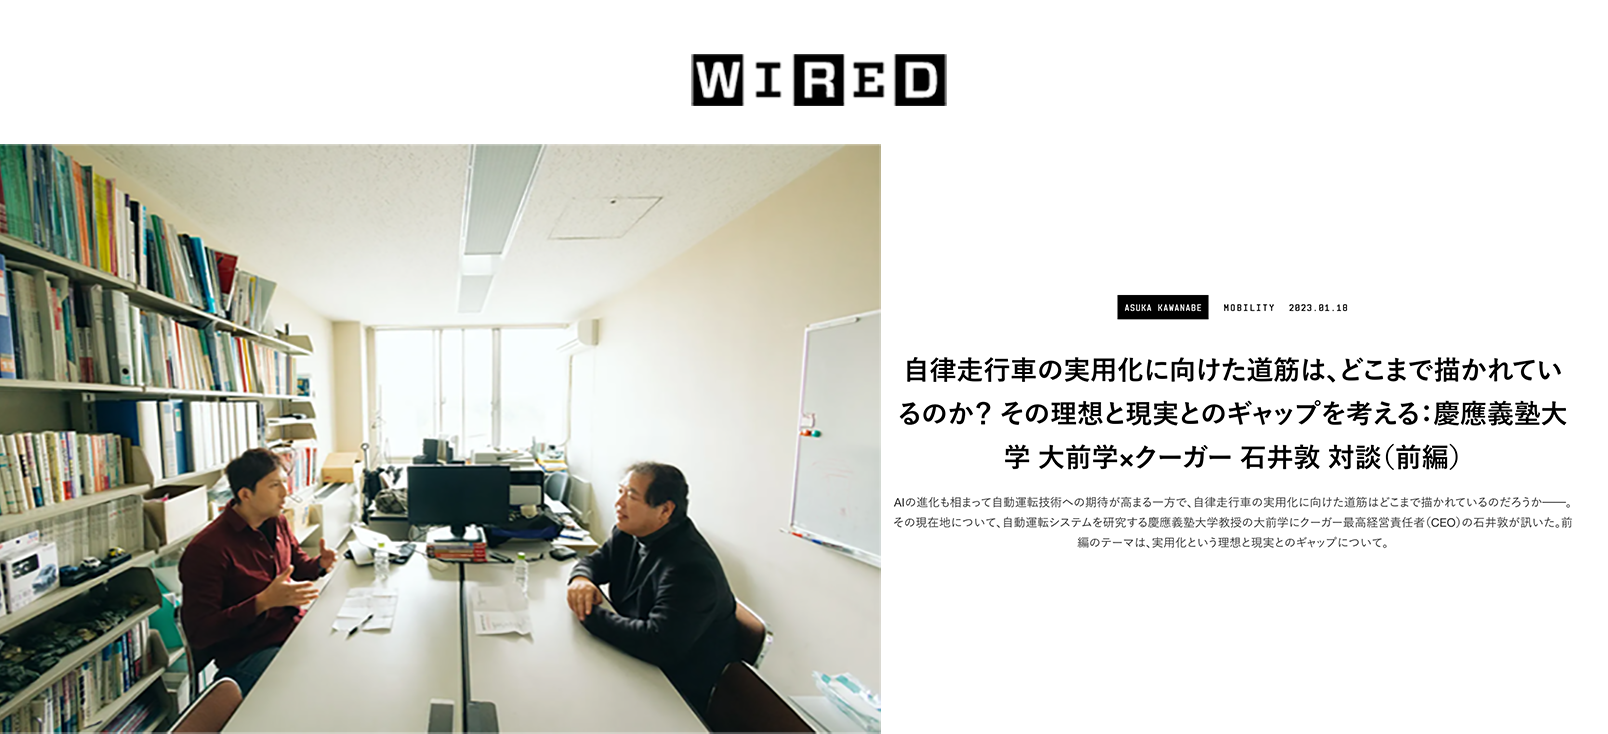 “WIRED" published an article about the conversation between Manabu Omae of Keio University and CEO Atsushi Ishii